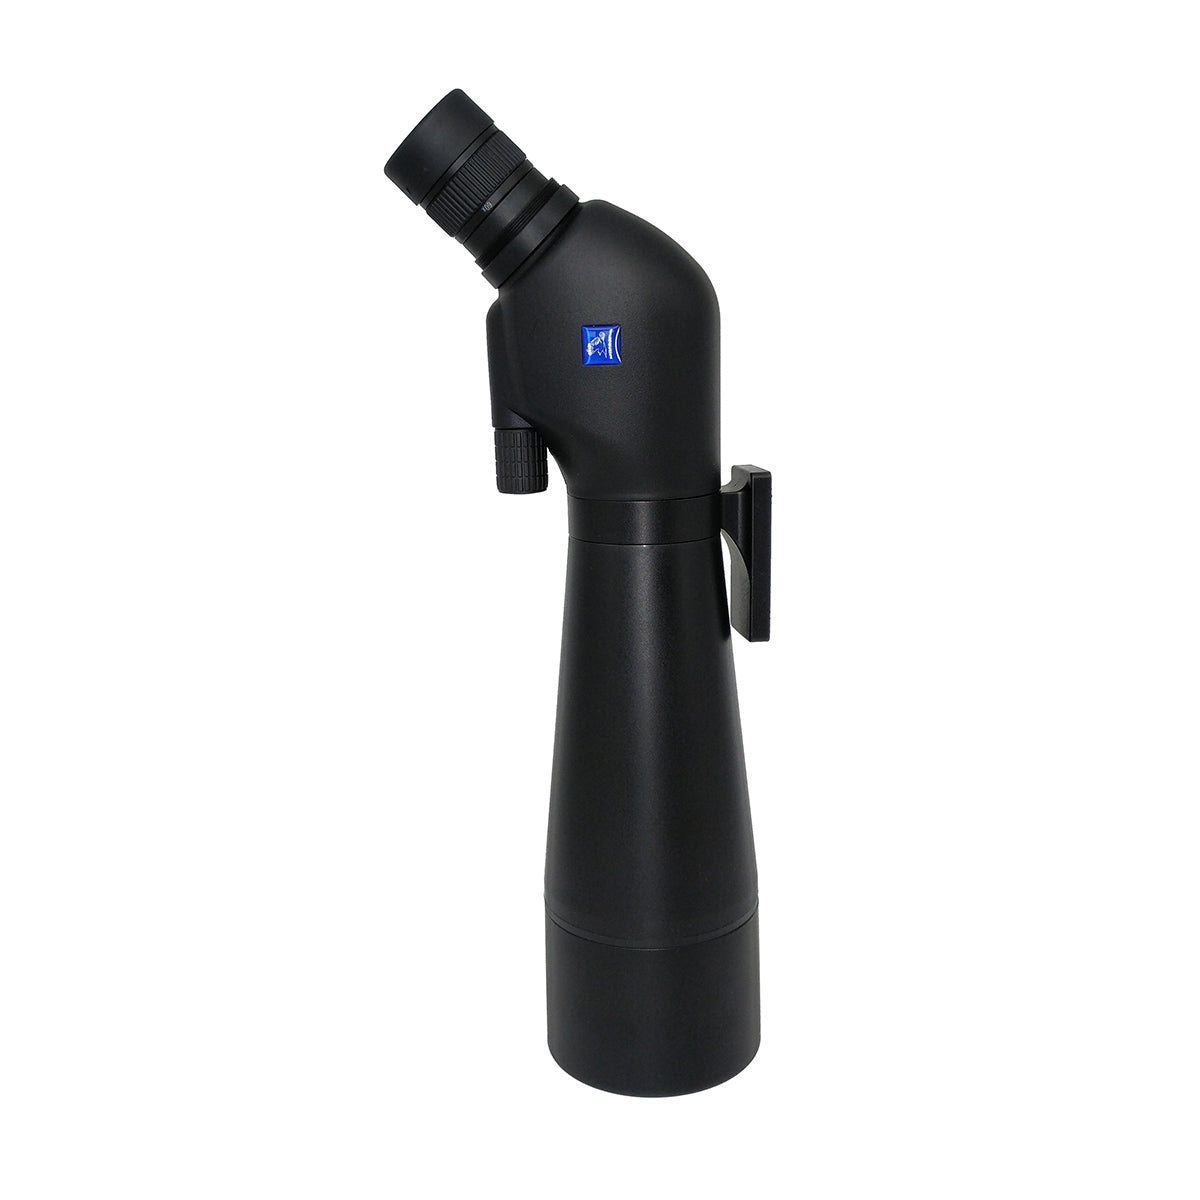 Monocular for Birding and Astronomy